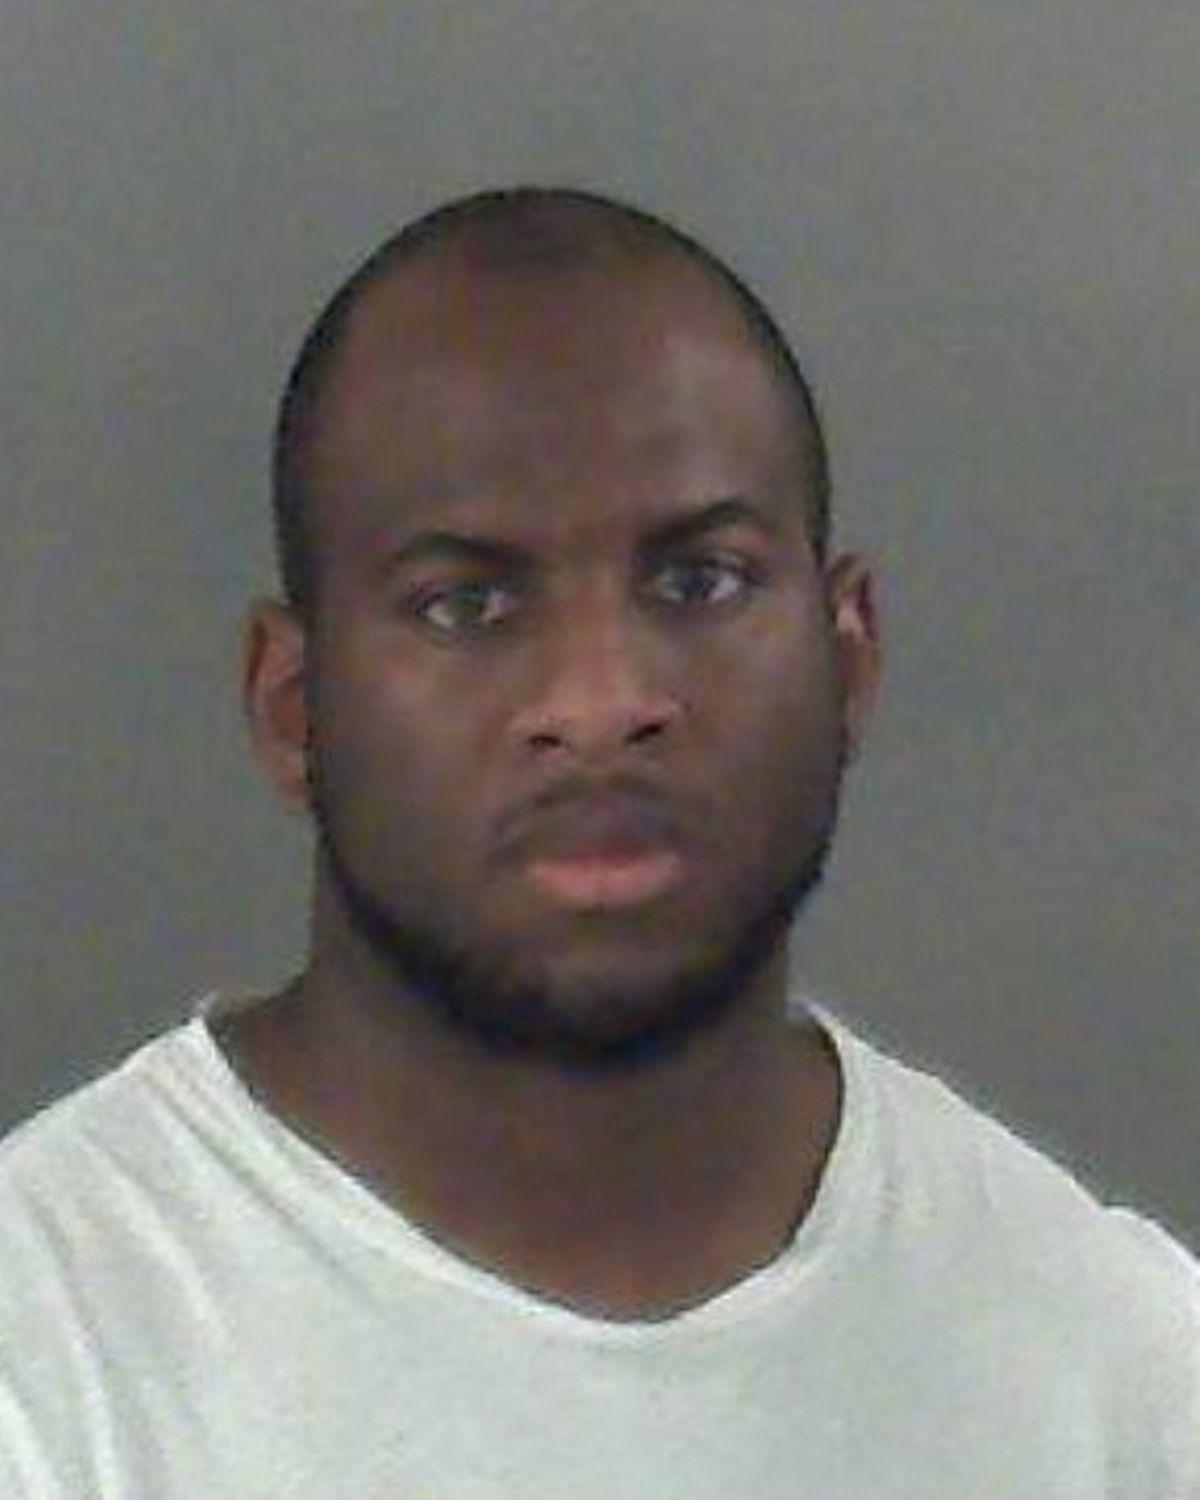 Aaron David, jailed for 36 months